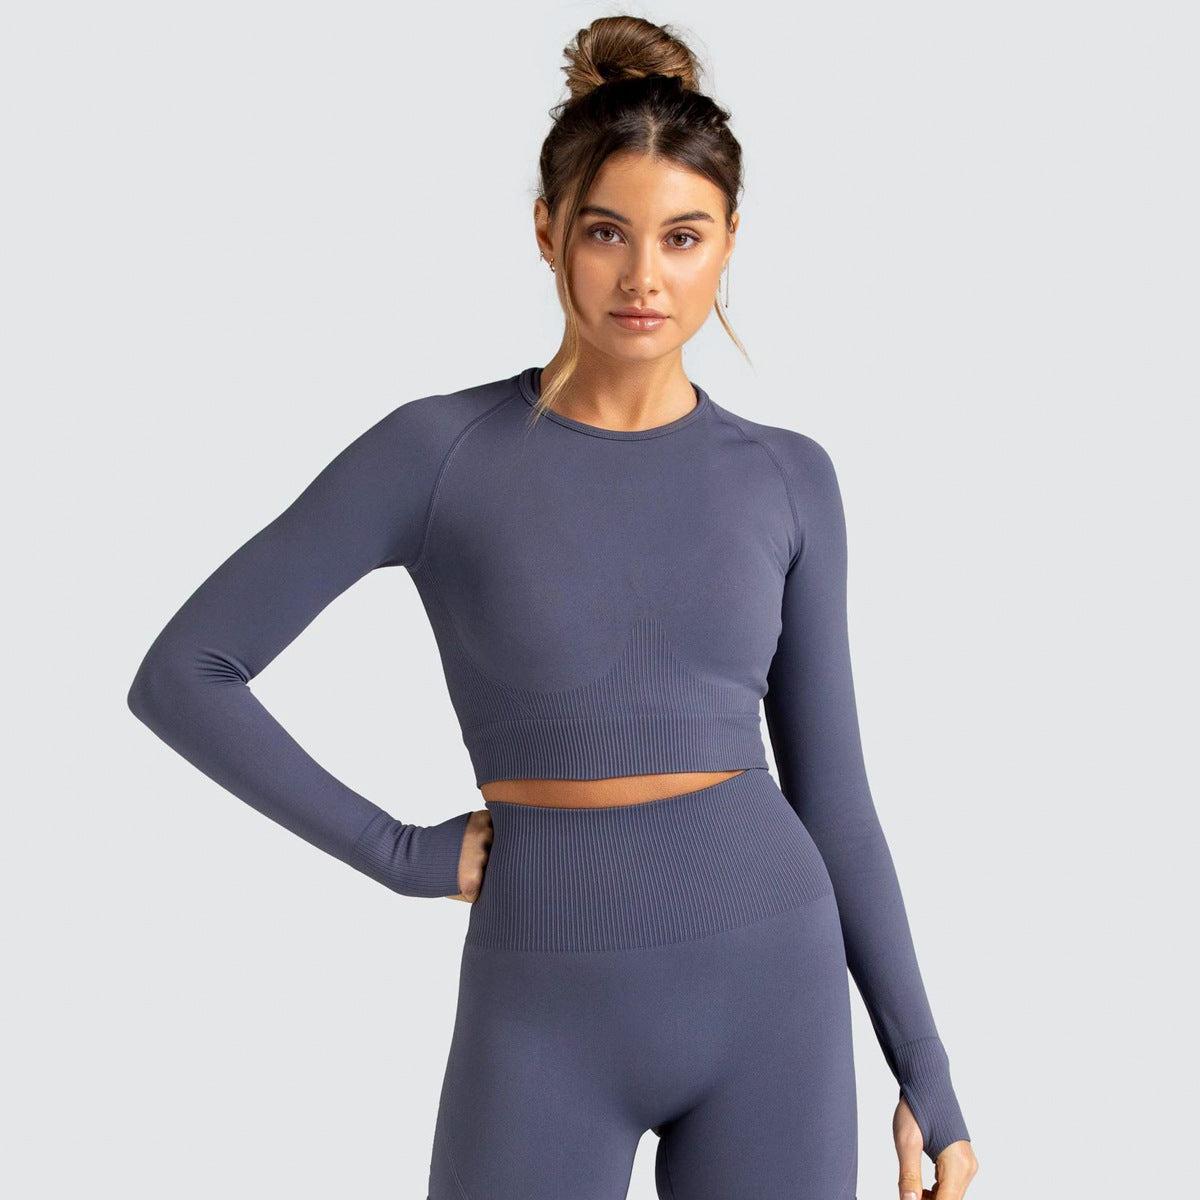 Knitted seamless long sleeve yoga exercise suit